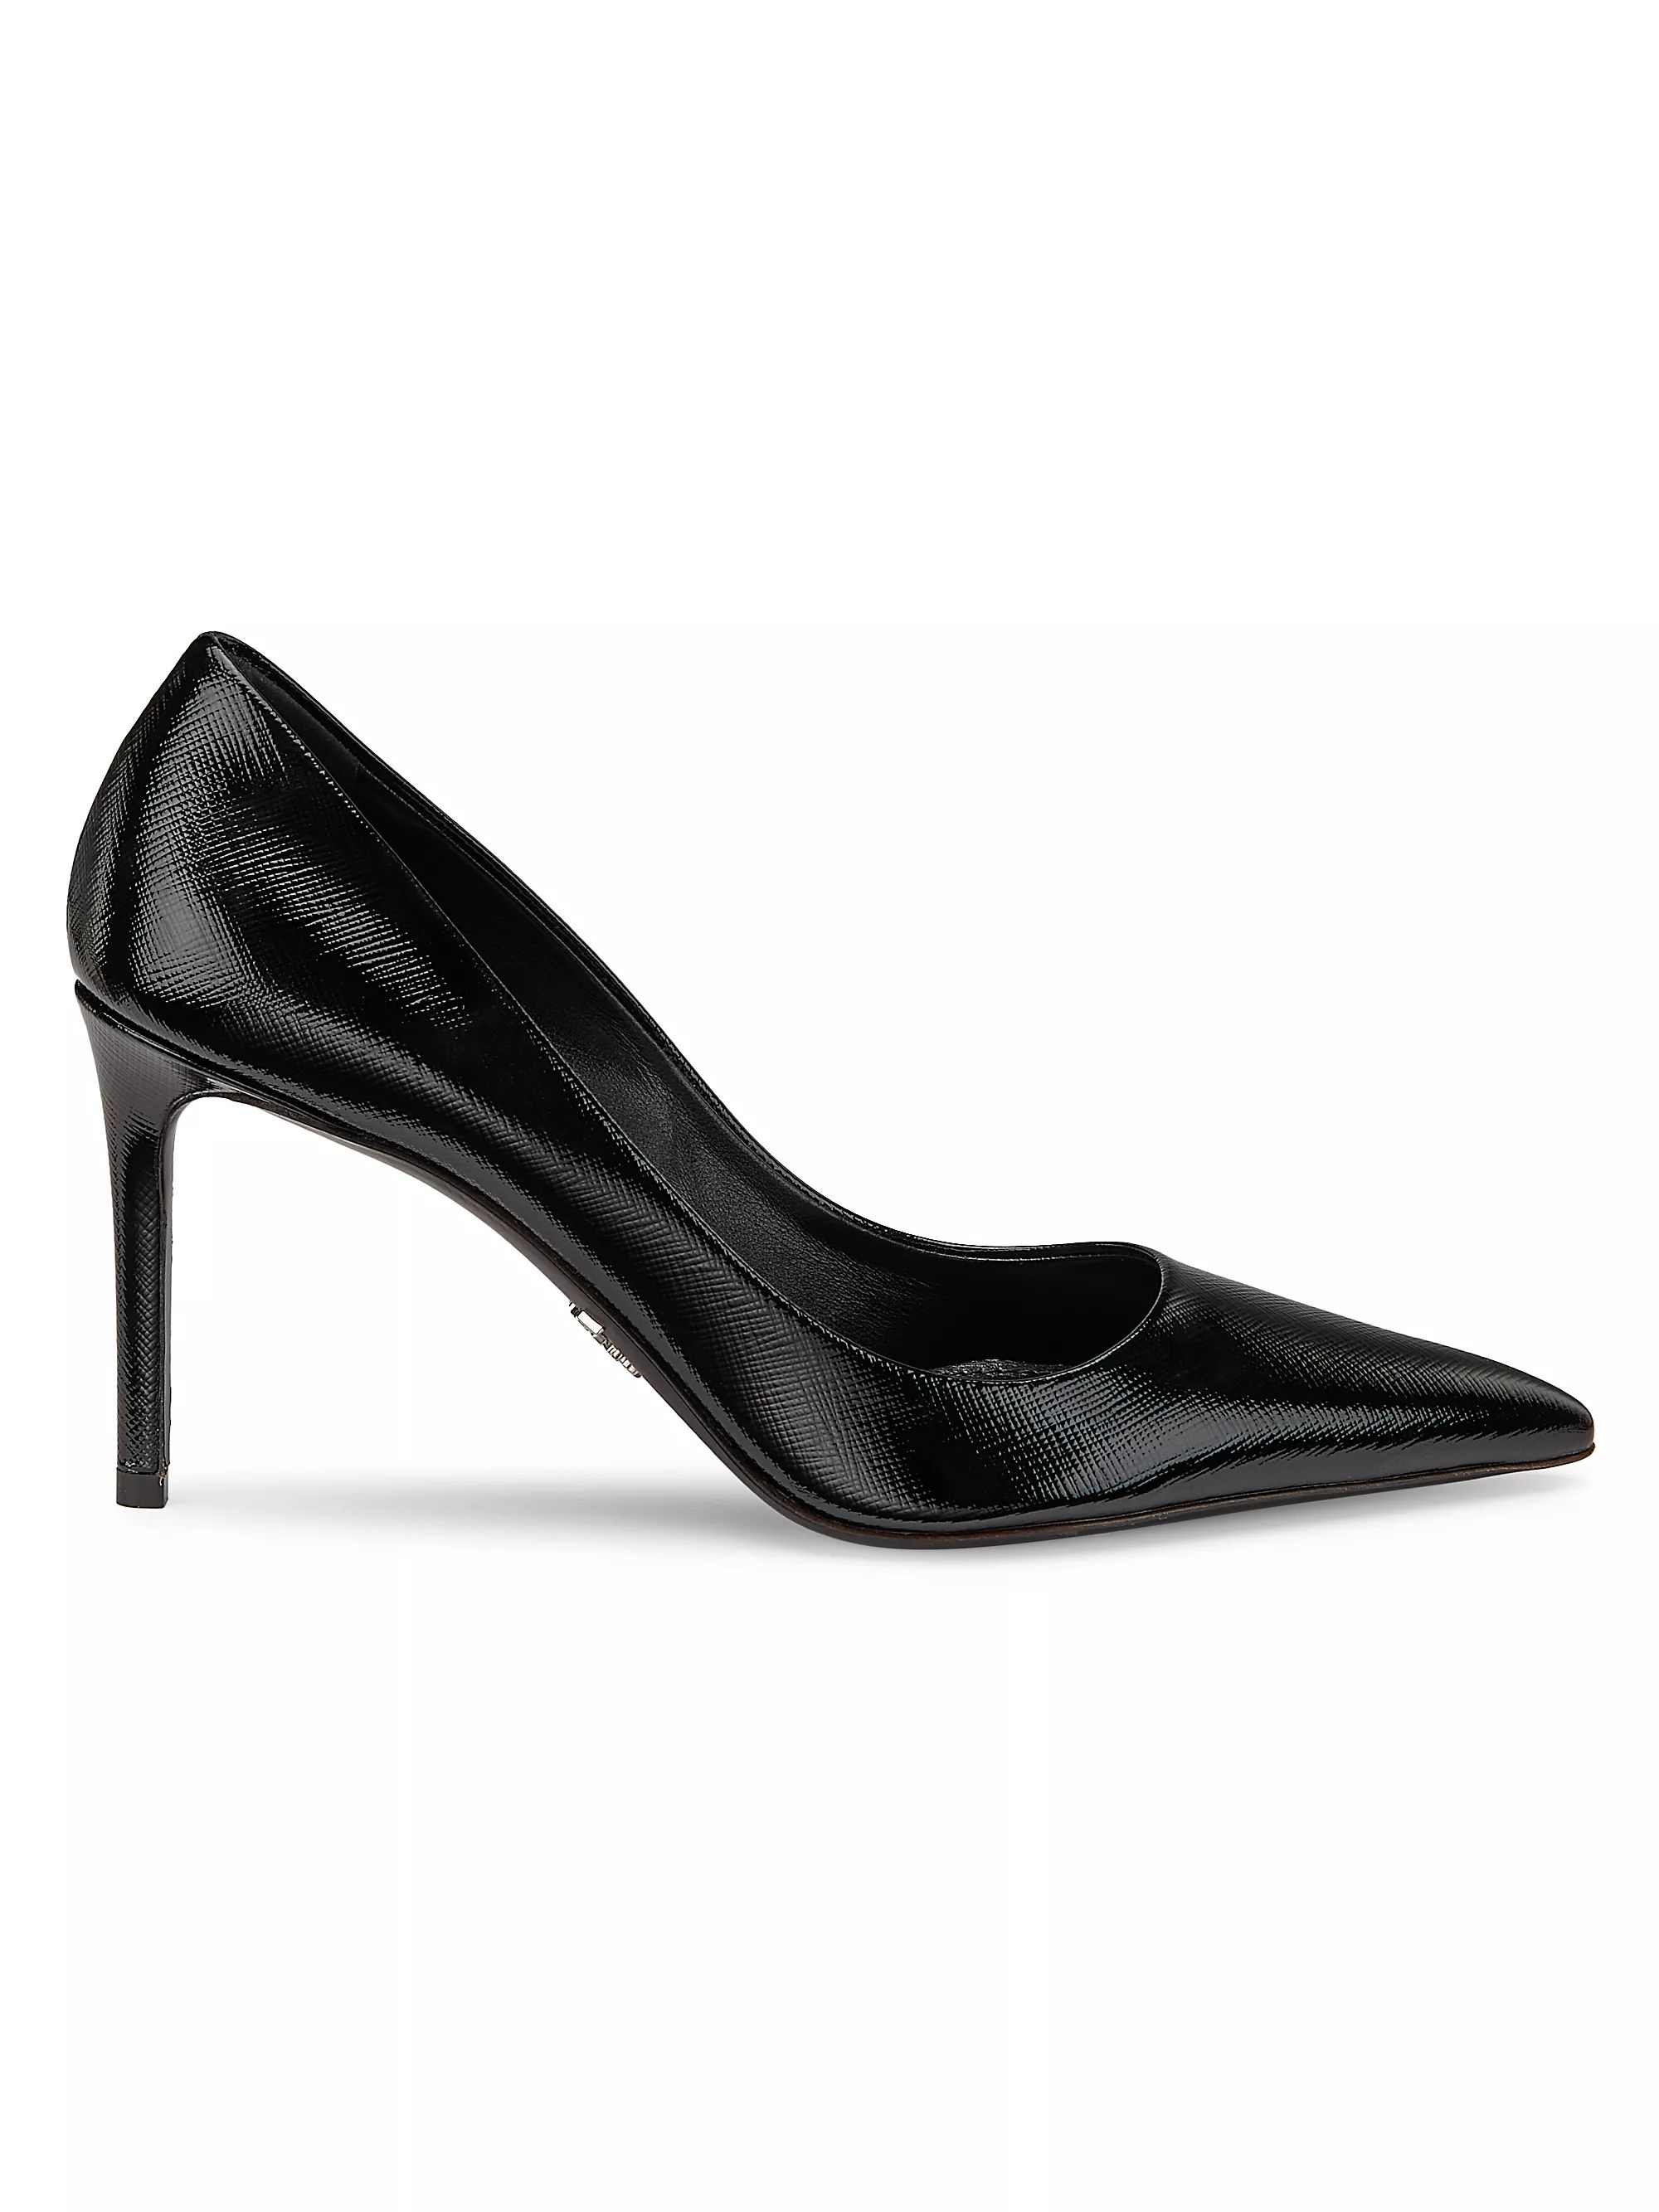 Saffiano Leather Pointed-Toe Pumps | Saks Fifth Avenue